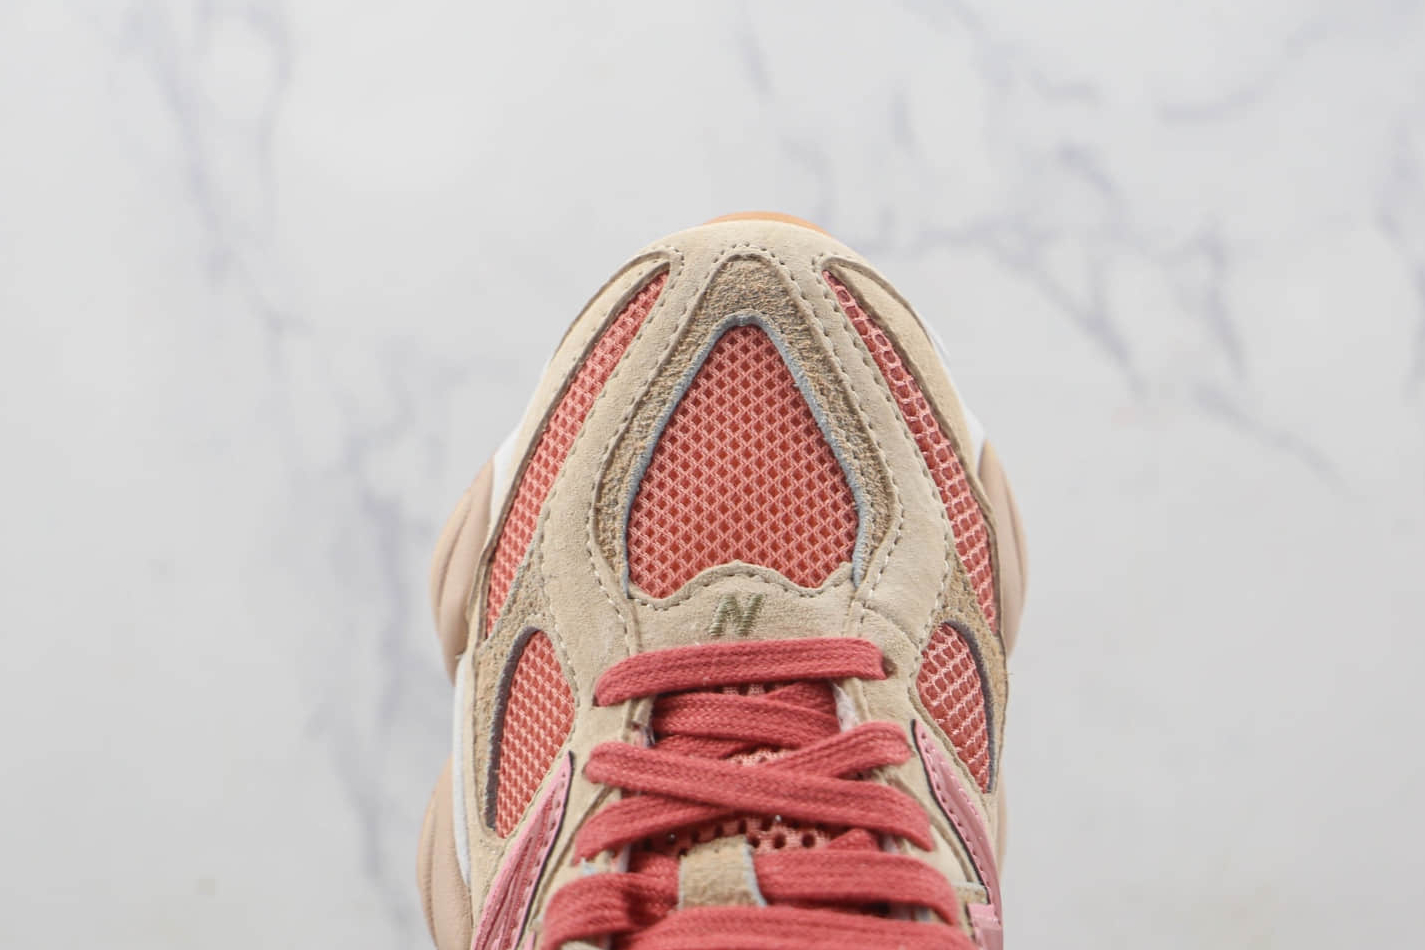 New Balance 9060 x Joe Freshgoods Penny Cookie Pink U9060JF1 - Limited Edition Collaboration Sneakers